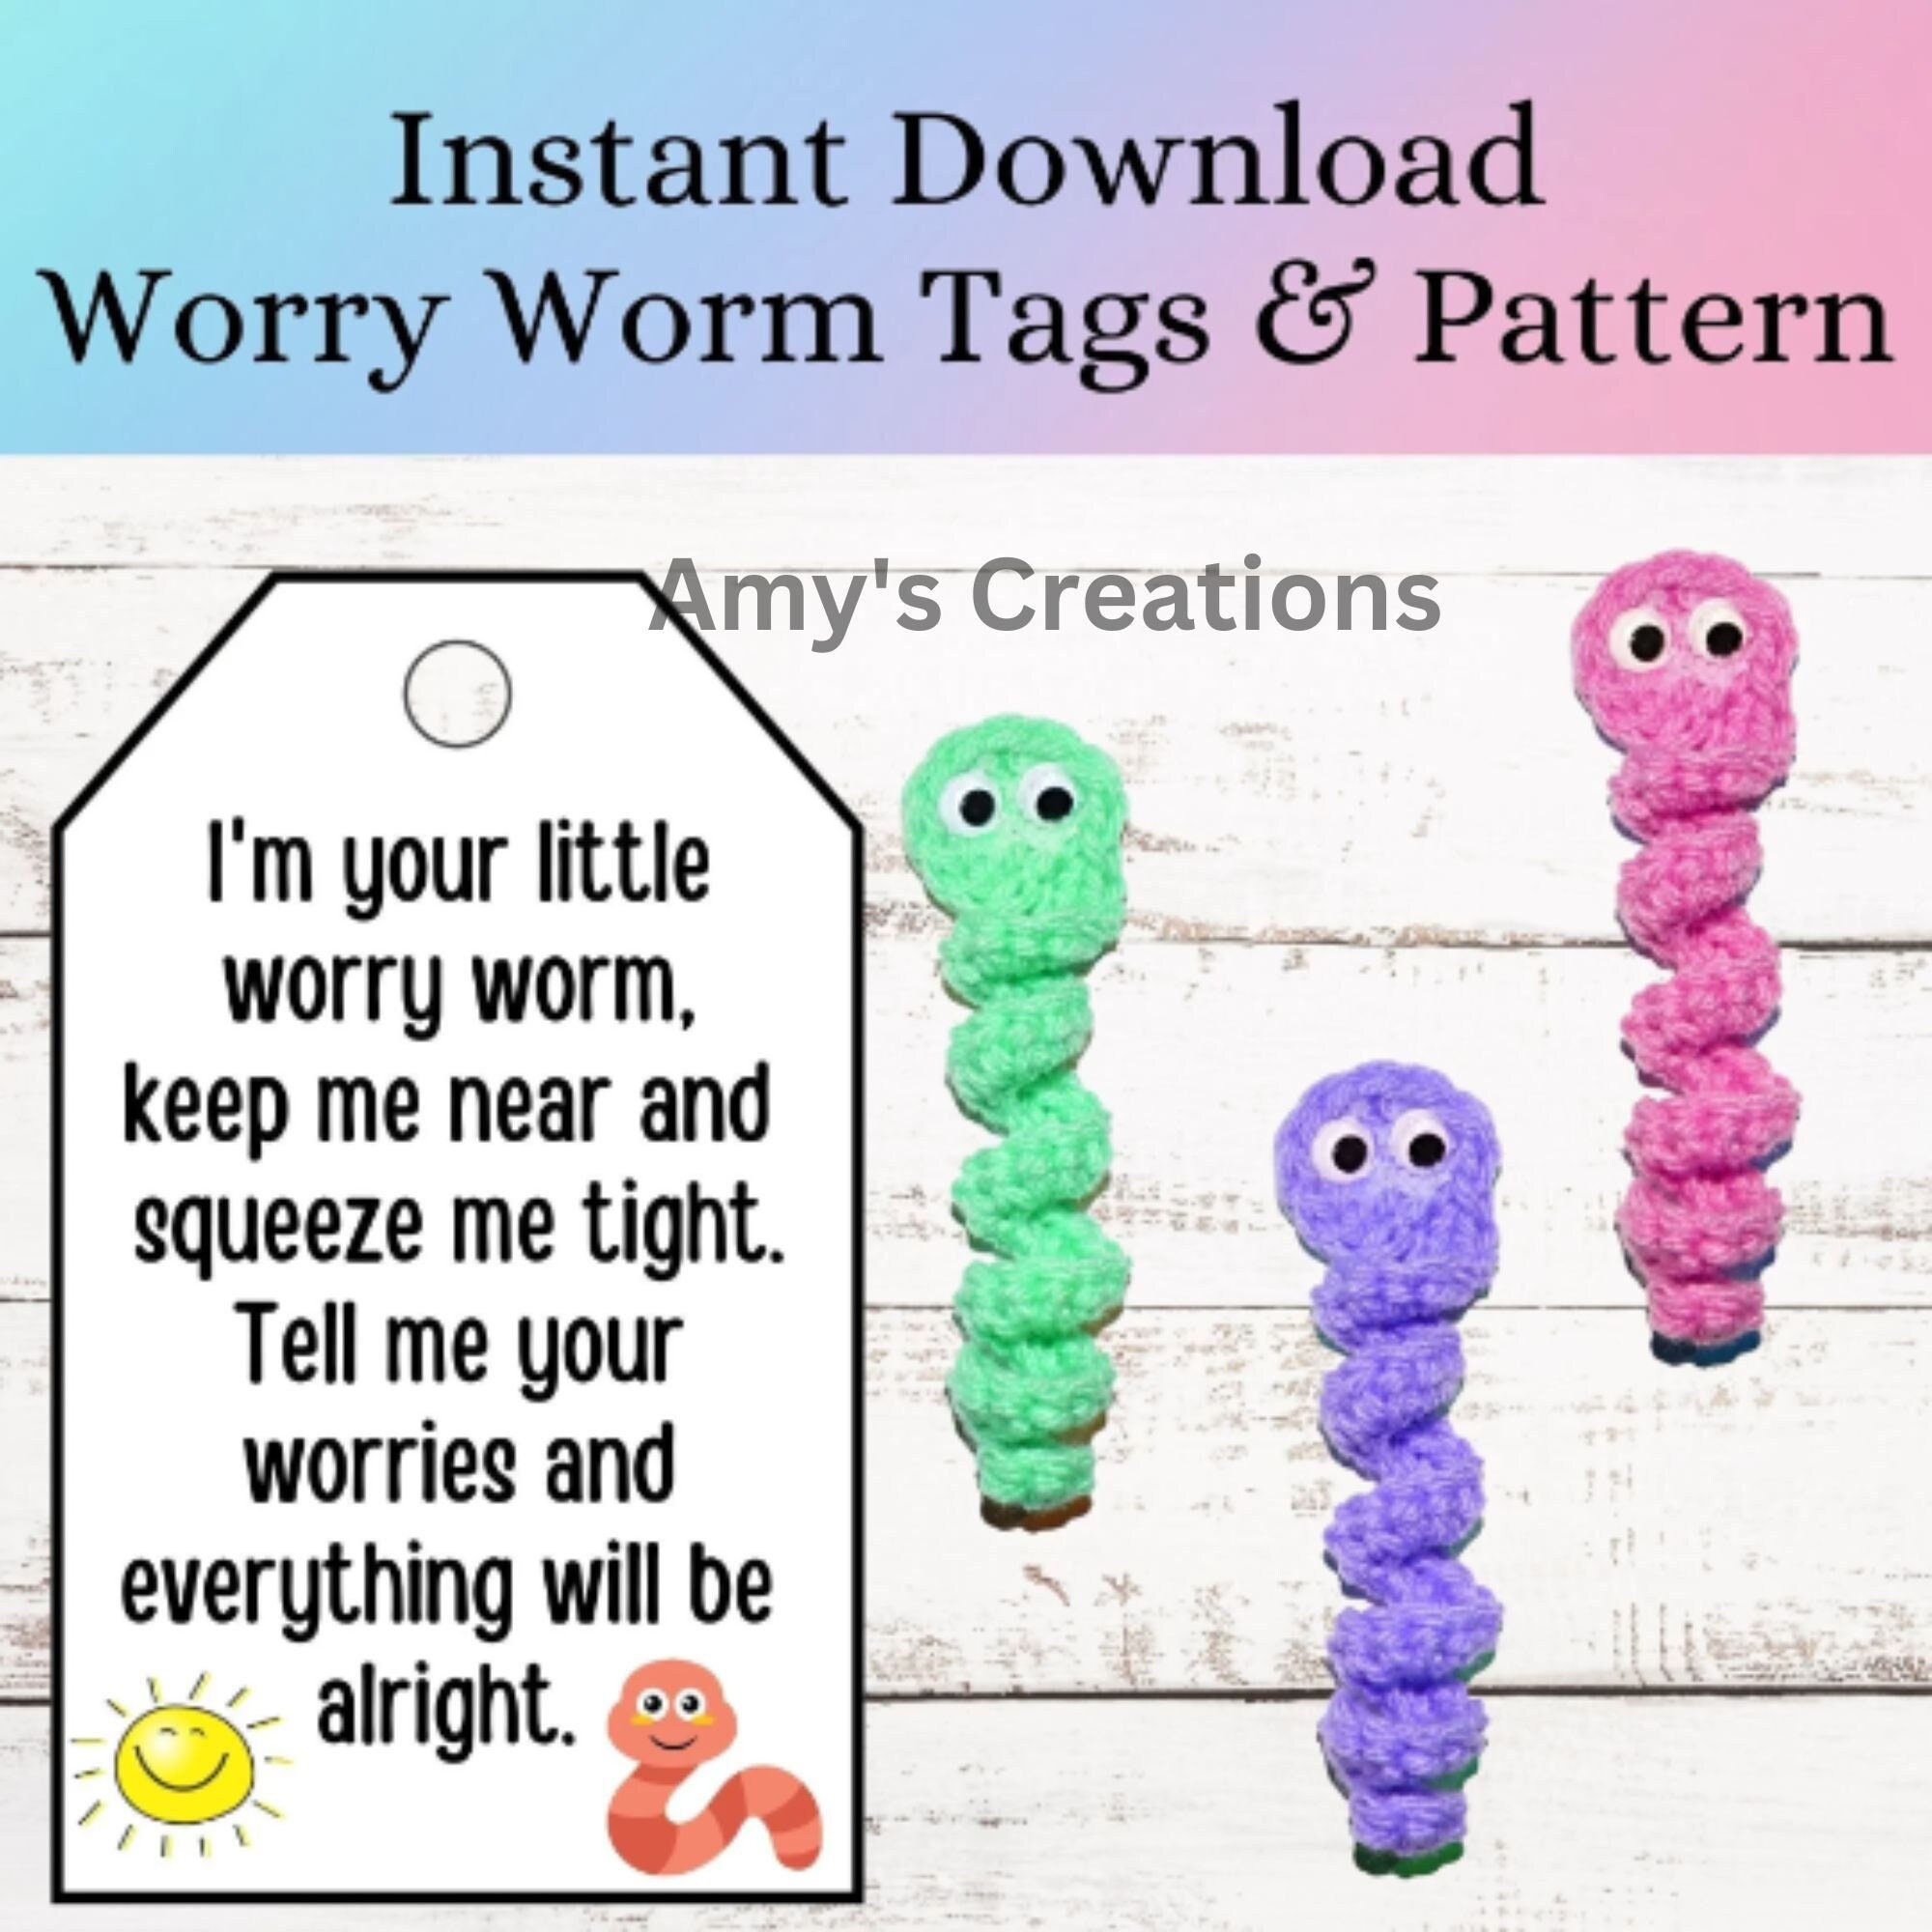 Wiggle Worm Fidget Toy: Assorted From 4.00 GBP